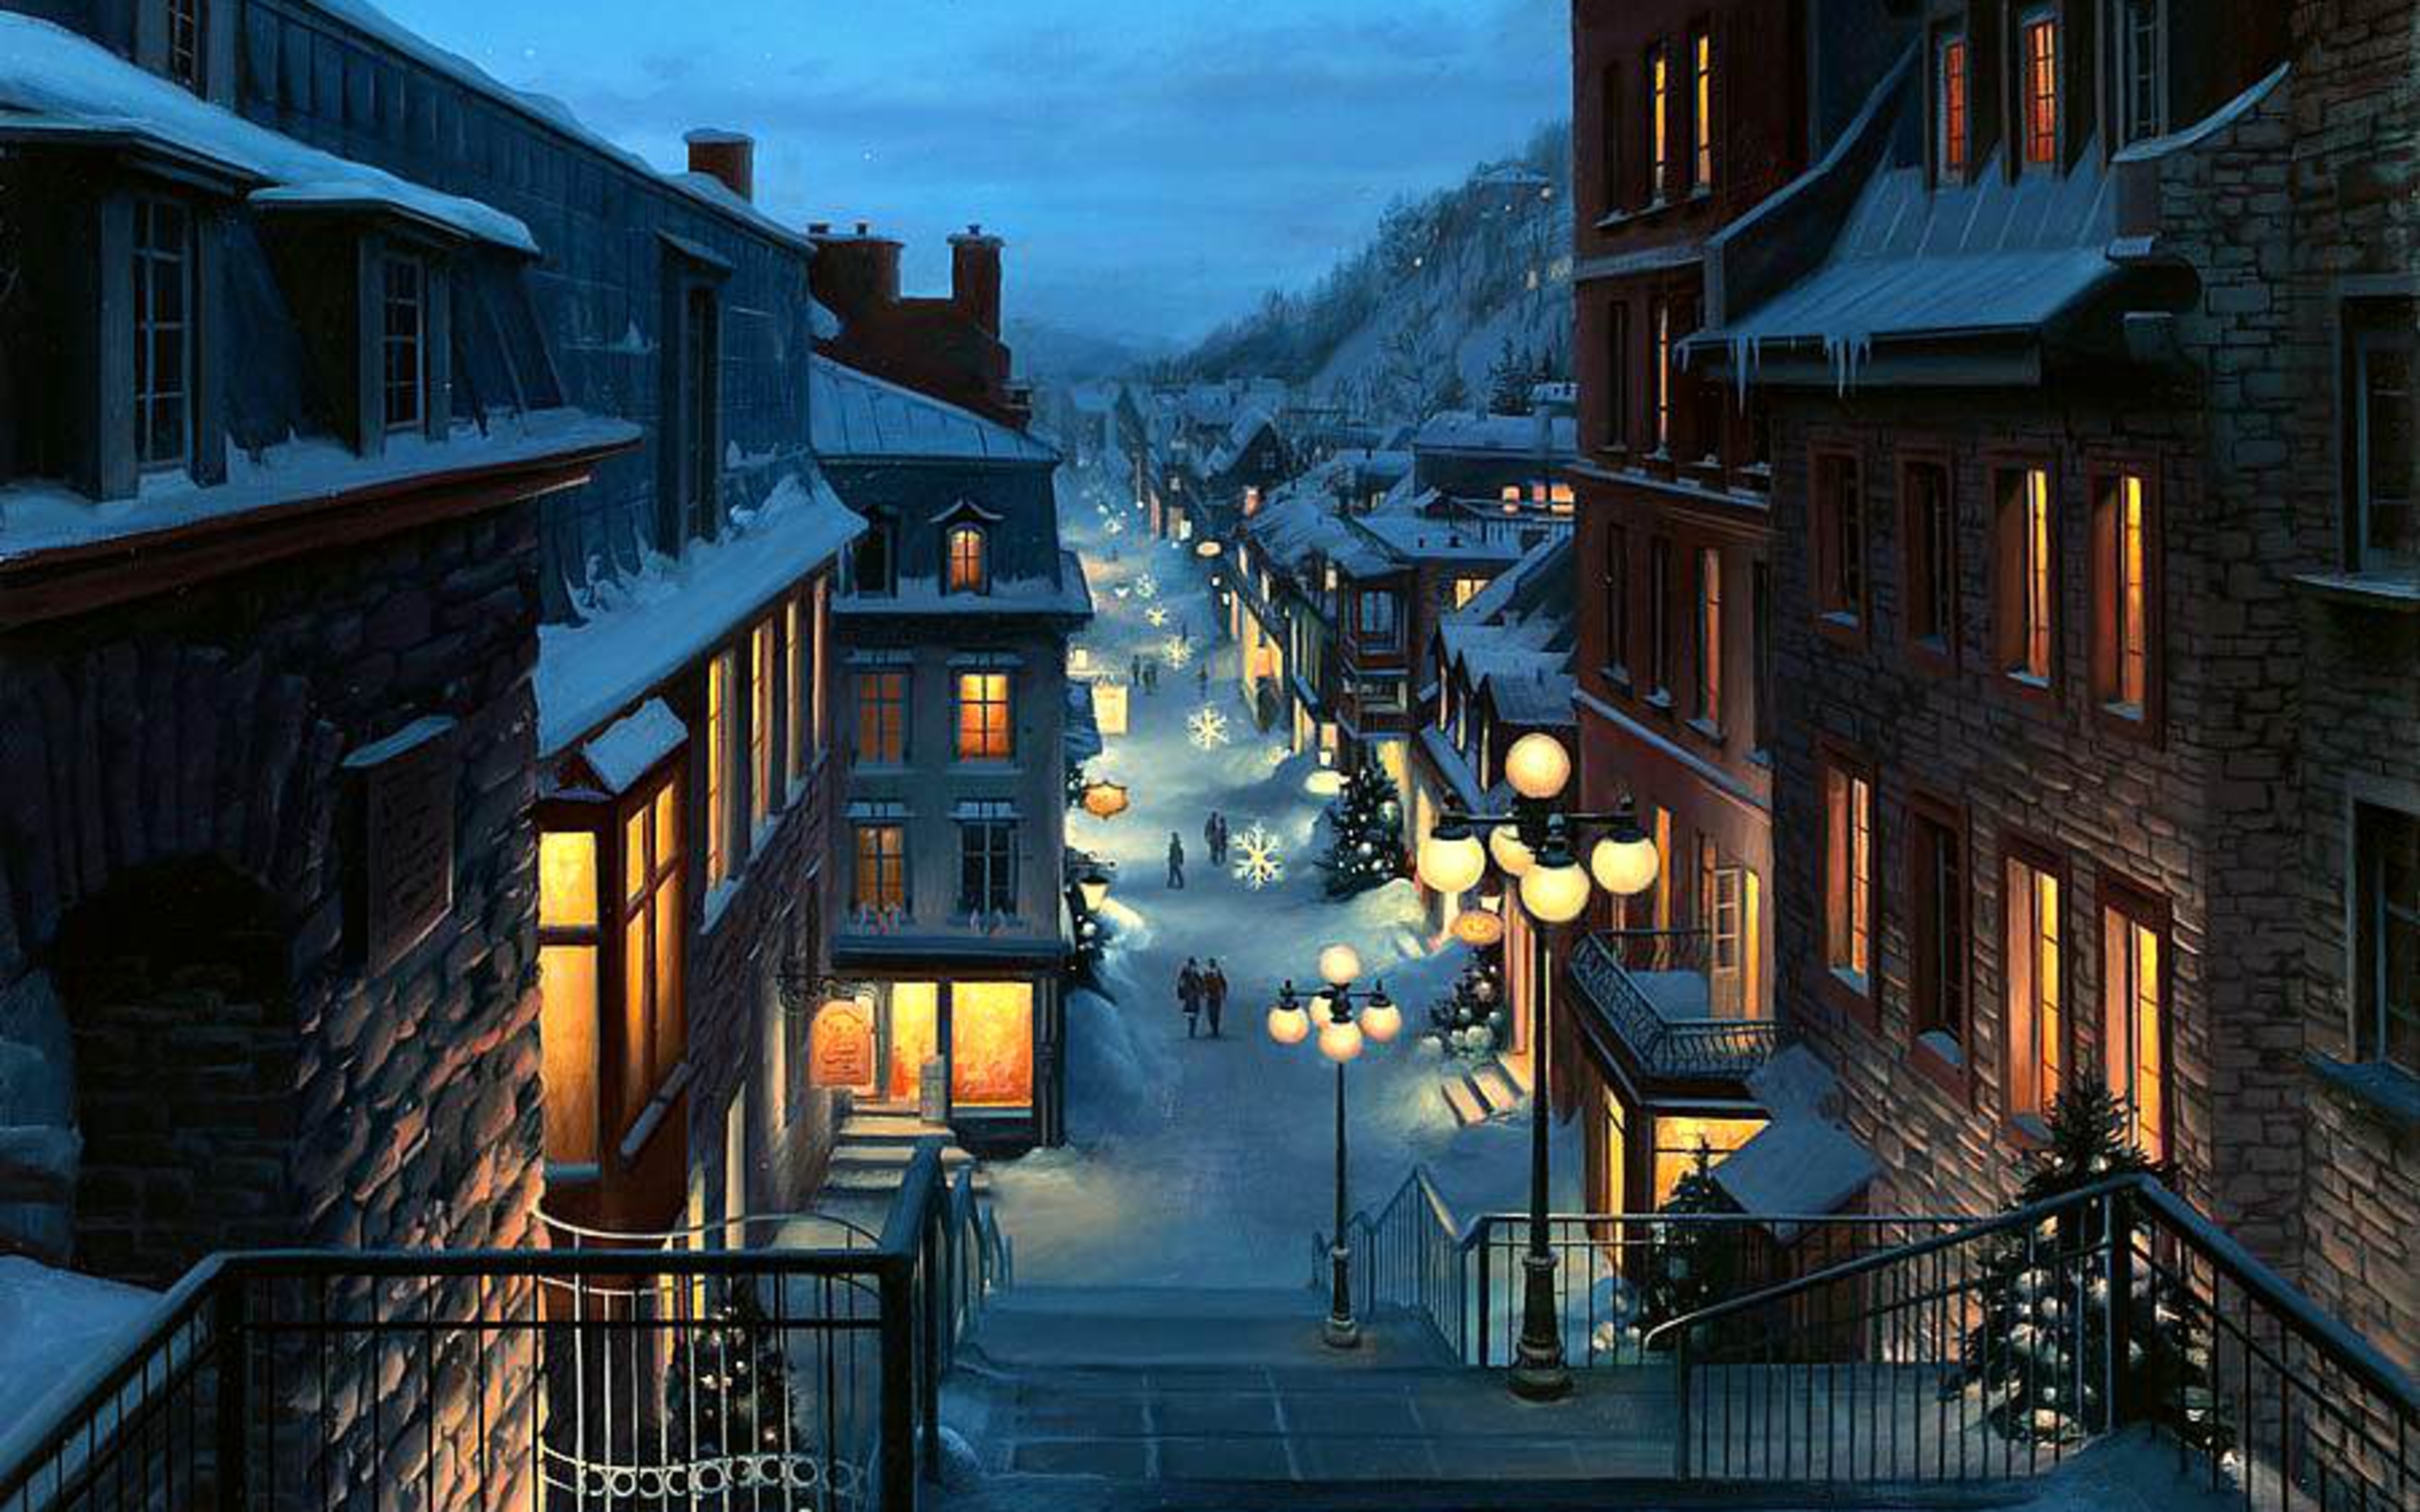  city Quebec Province Canada Christmas night painting wallpaper